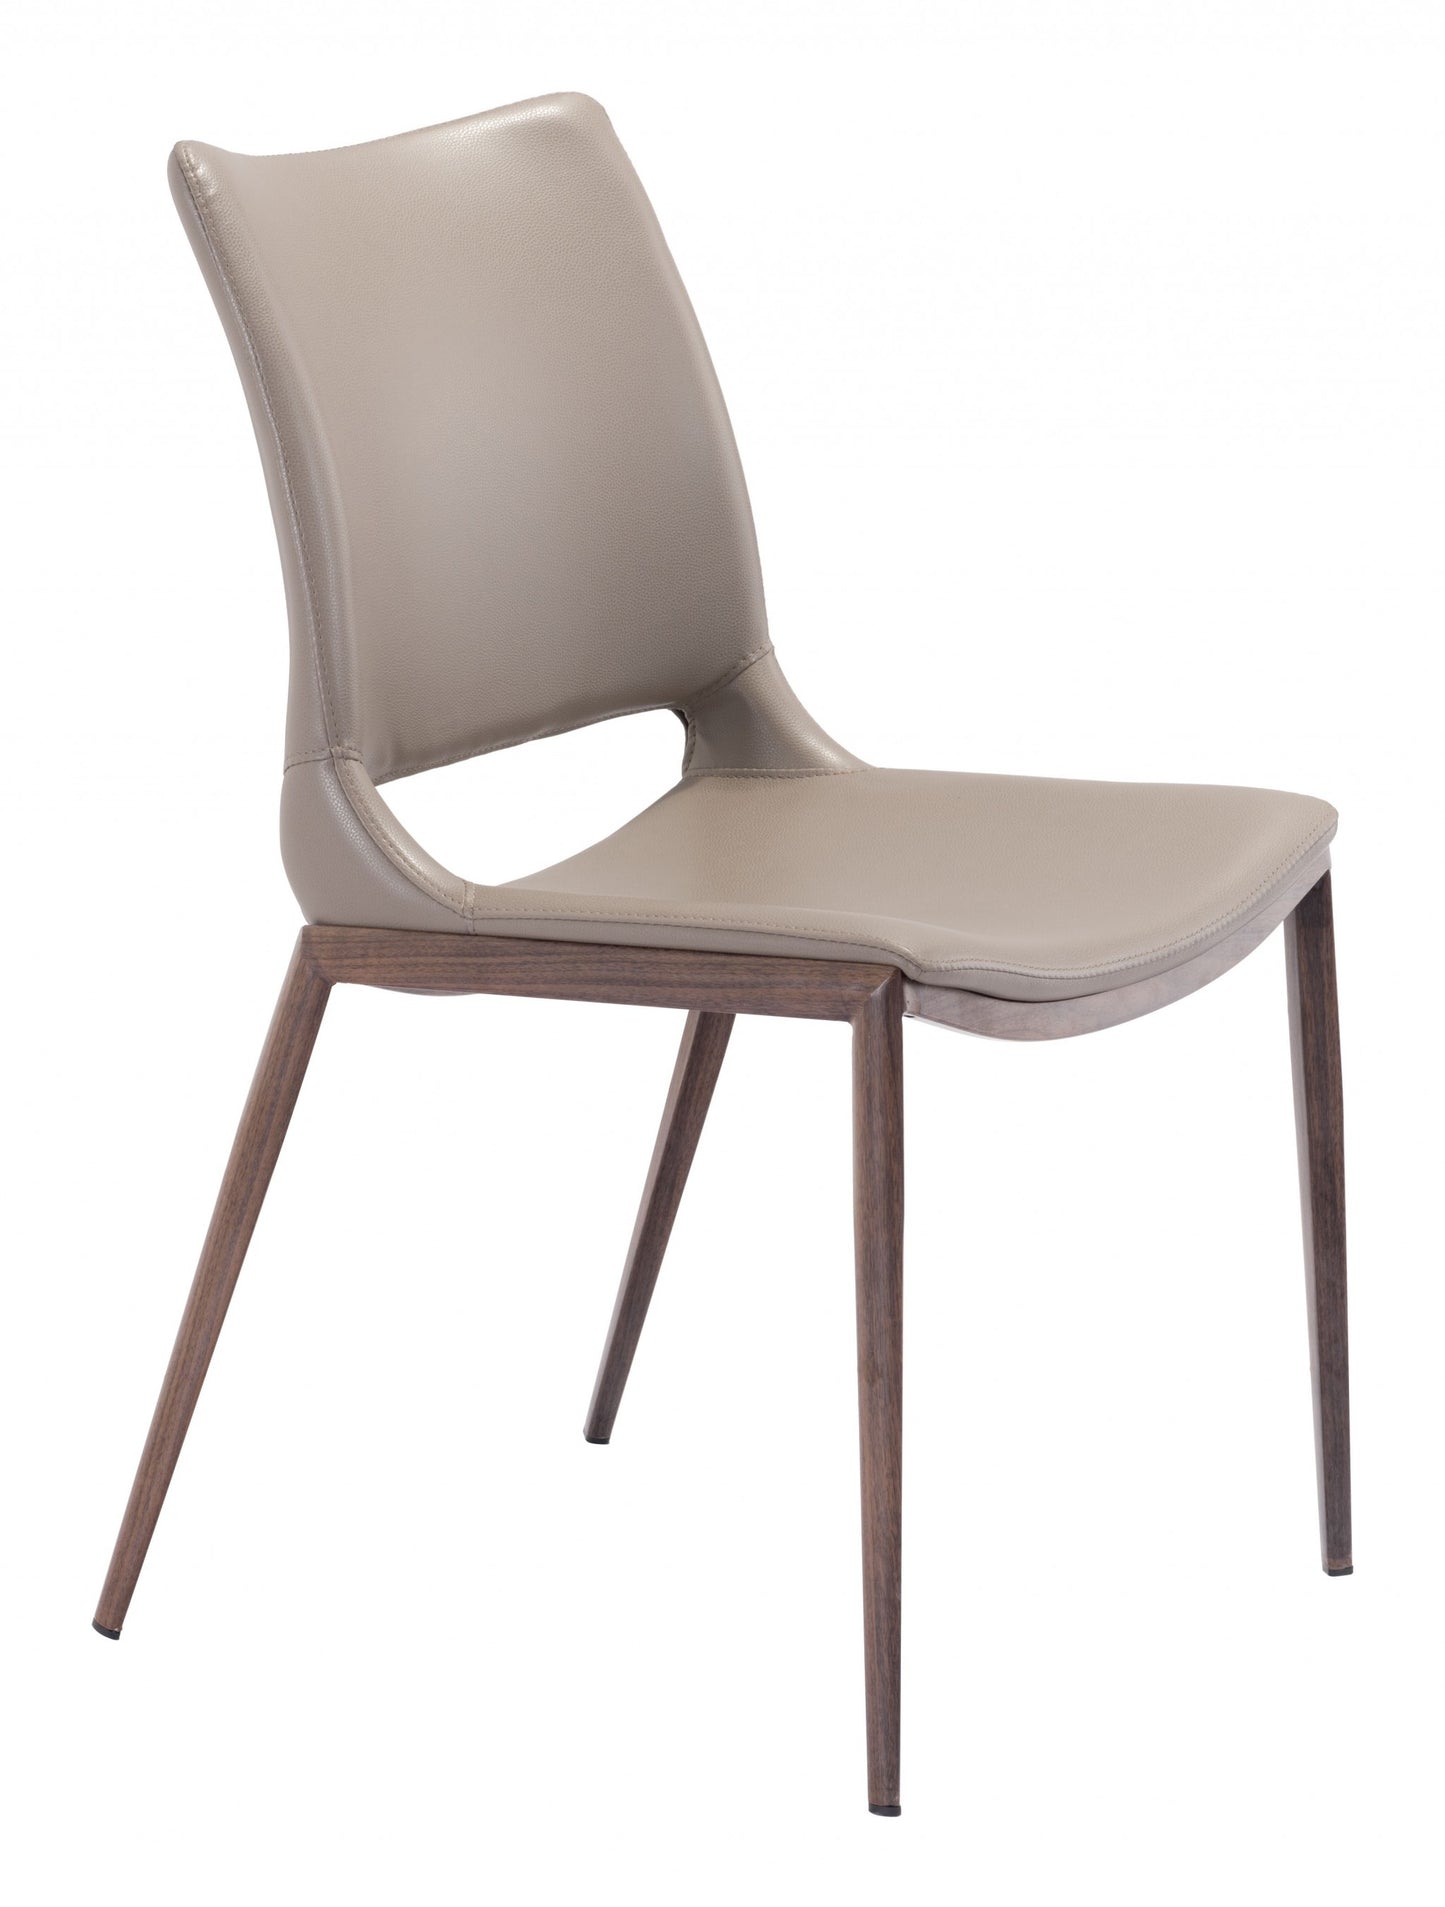 Set of Two Gray Faux Leather and Espresso Mod Ergo Dining Chairs